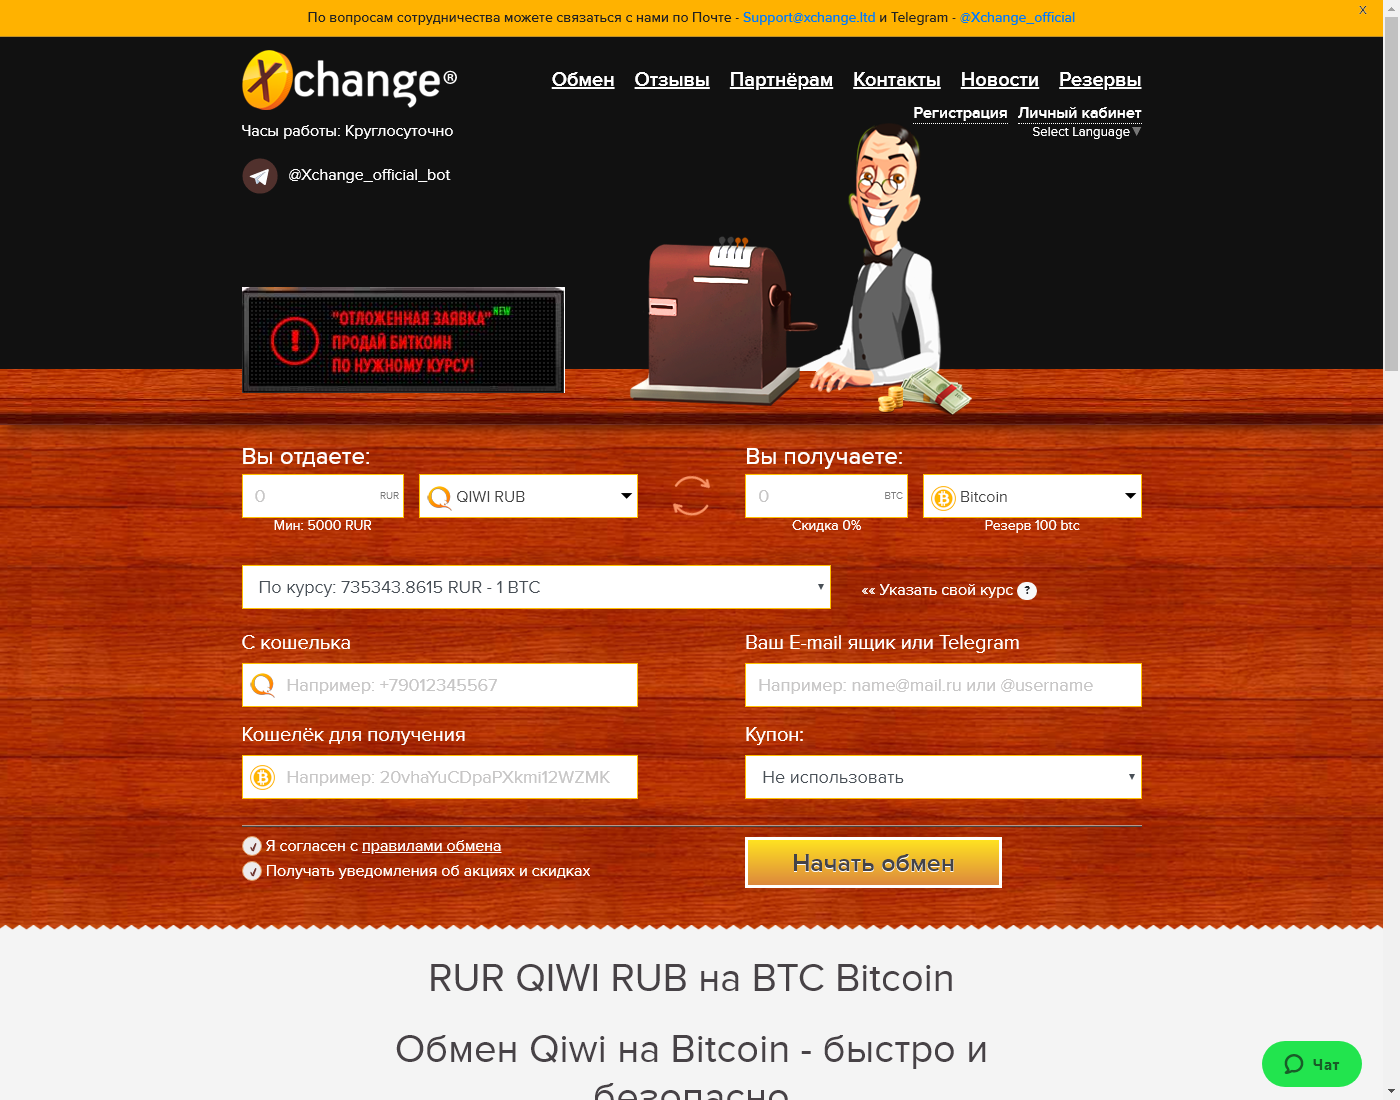 xChange user interface: the home page in English